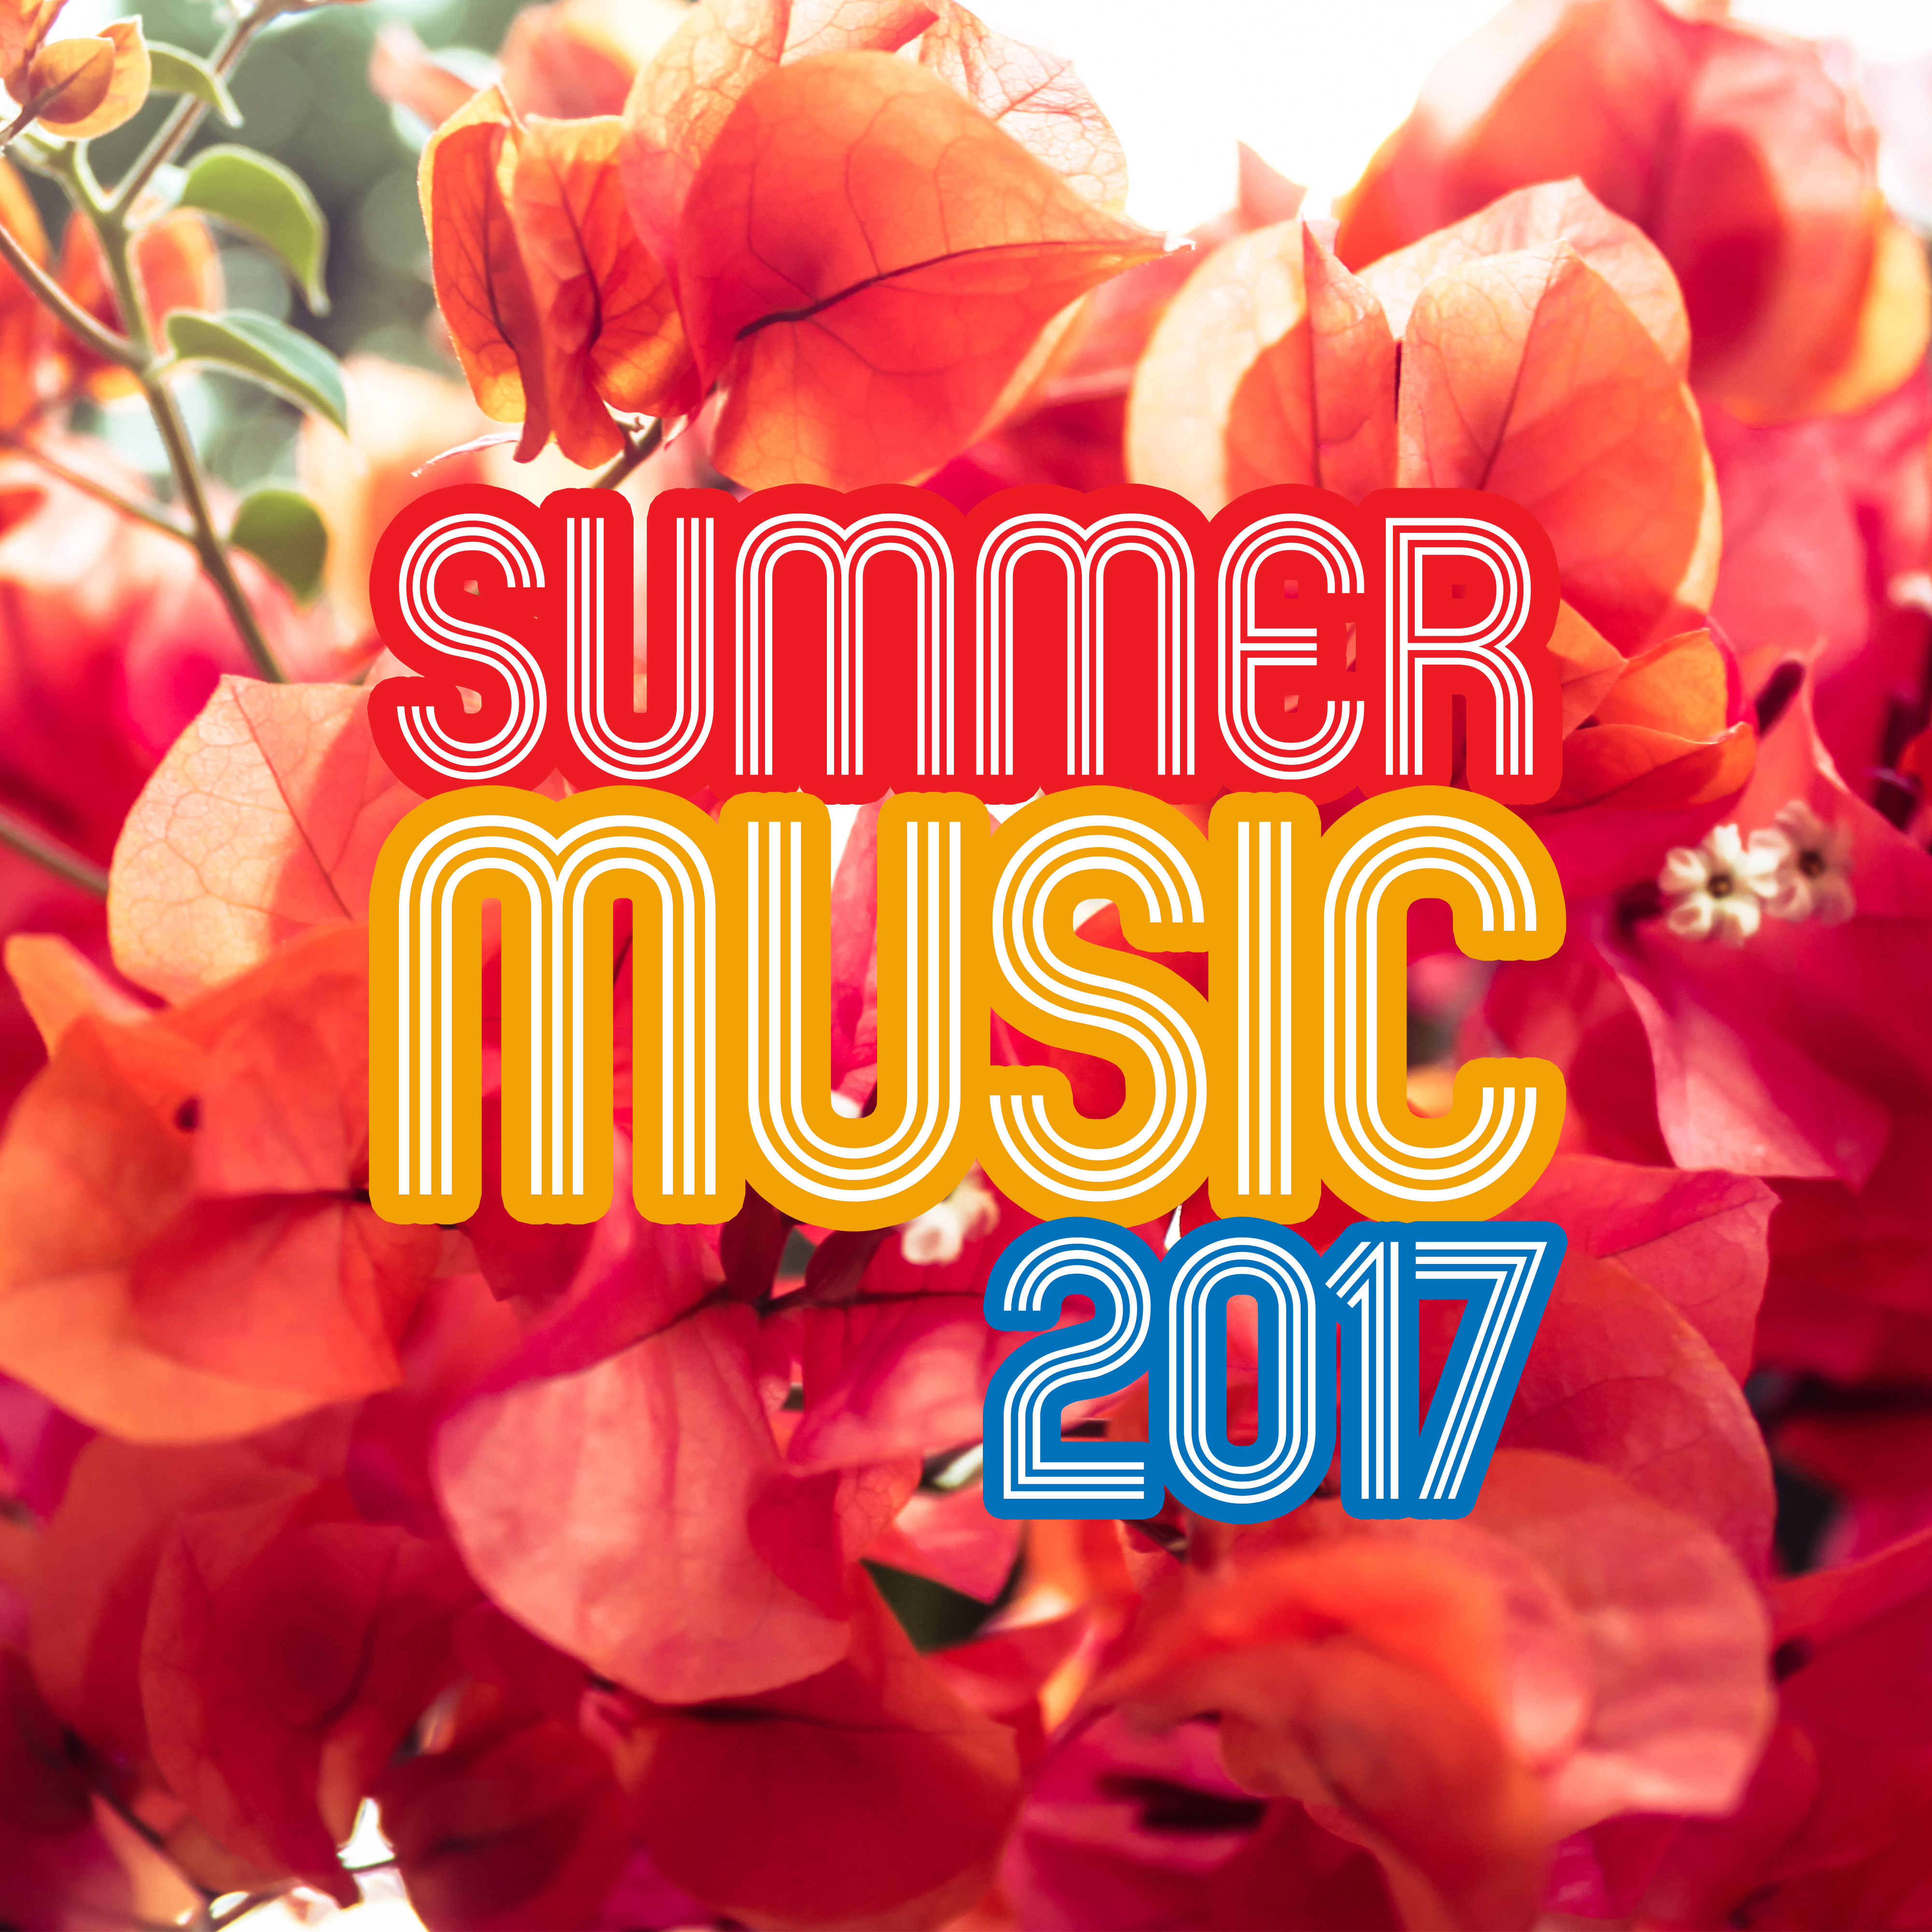 Summer Music 2017 – Ibiza Dance Party, Relax, Beach Chill, Ibiza Summertime, Sensual Dance, **** Vibes, Ambient Chill Out, Party Night